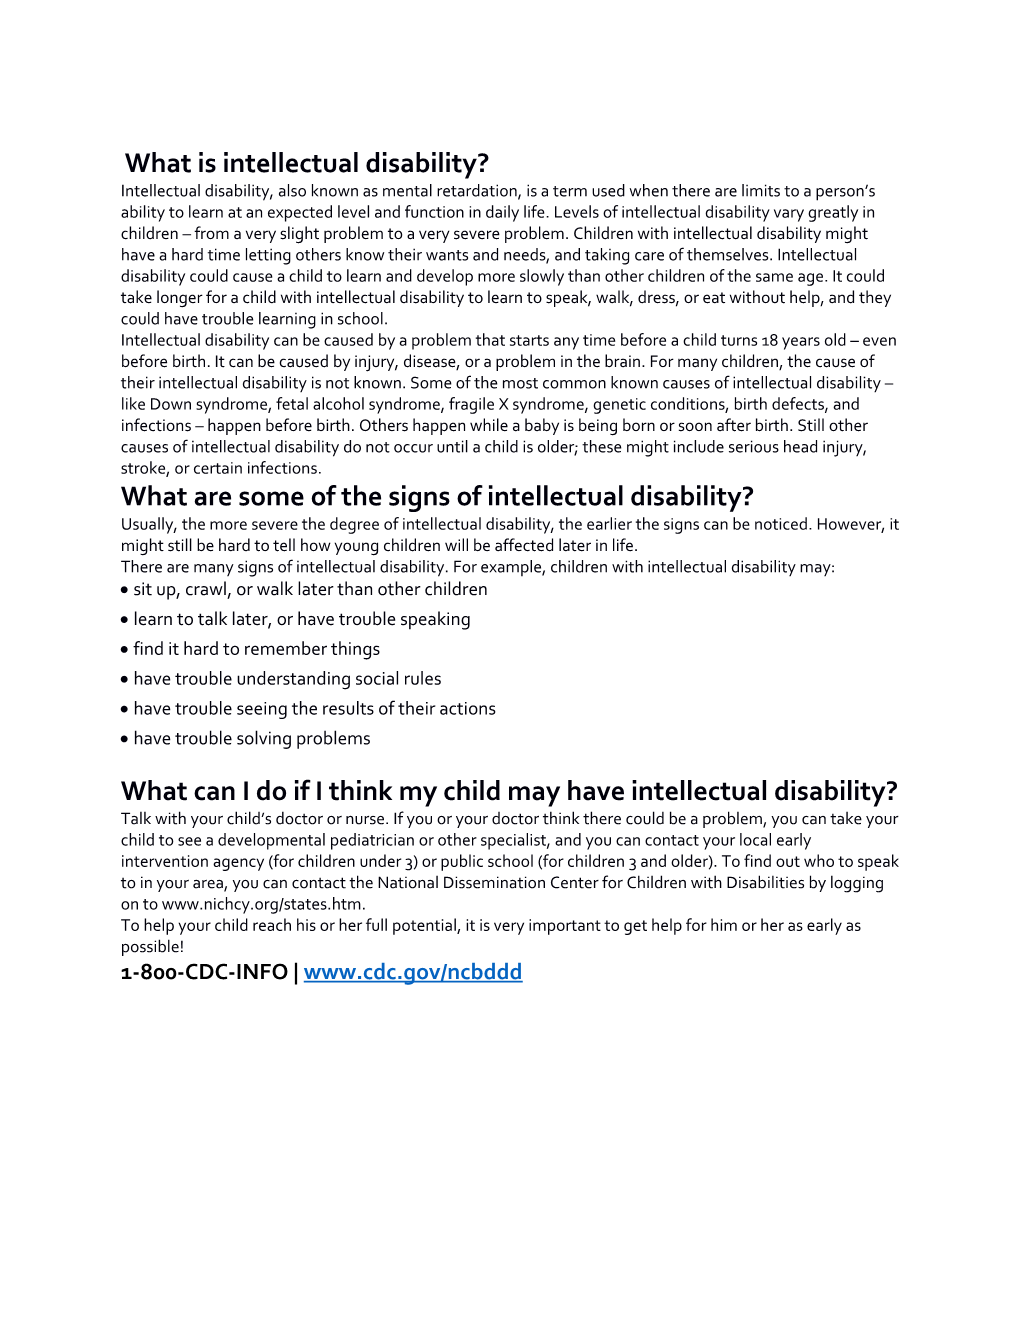 What Are Some of the Signs of Intellectual Disability?